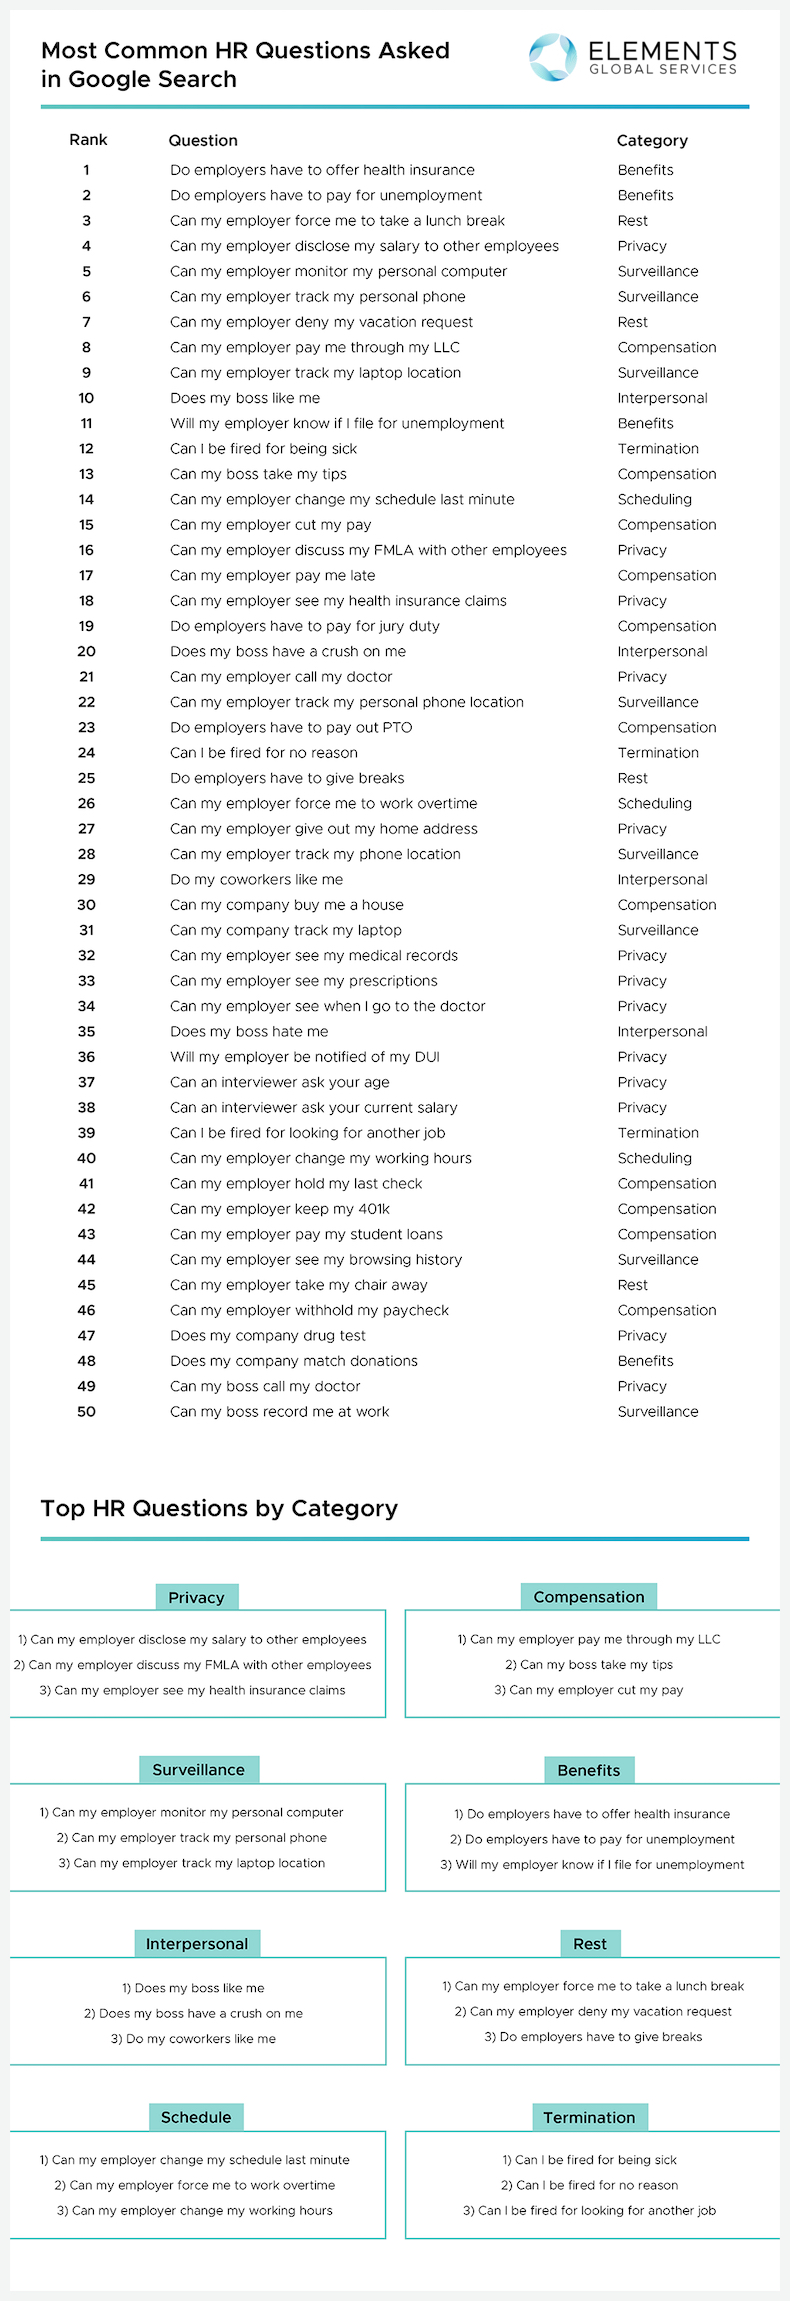 Most common HR questions in Google search